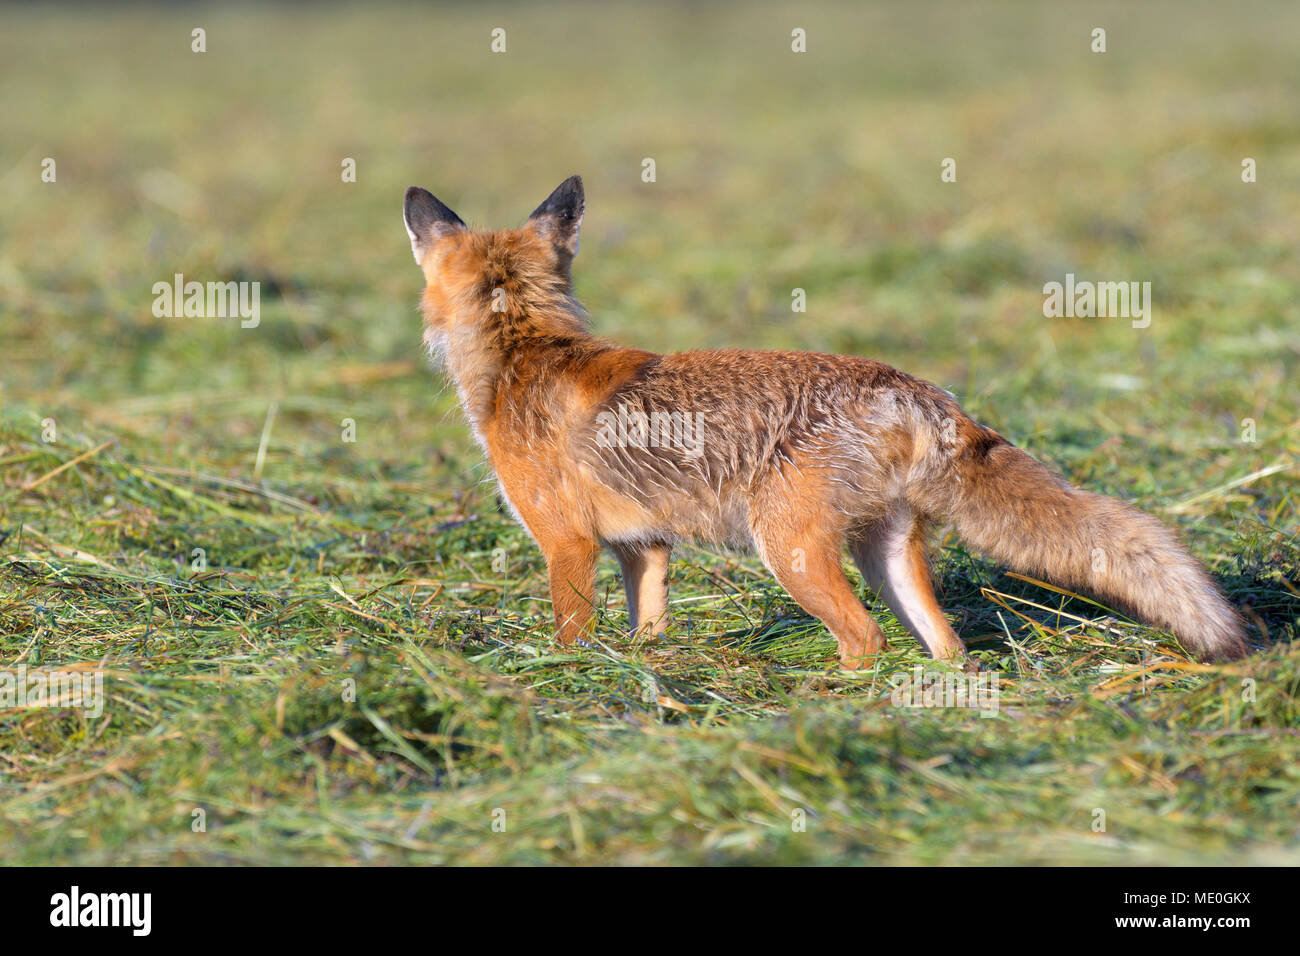 Back view of a red fox (Vulpes vulpes) standing on a mowed meadow watching, Hesse, Germany Stock Photo